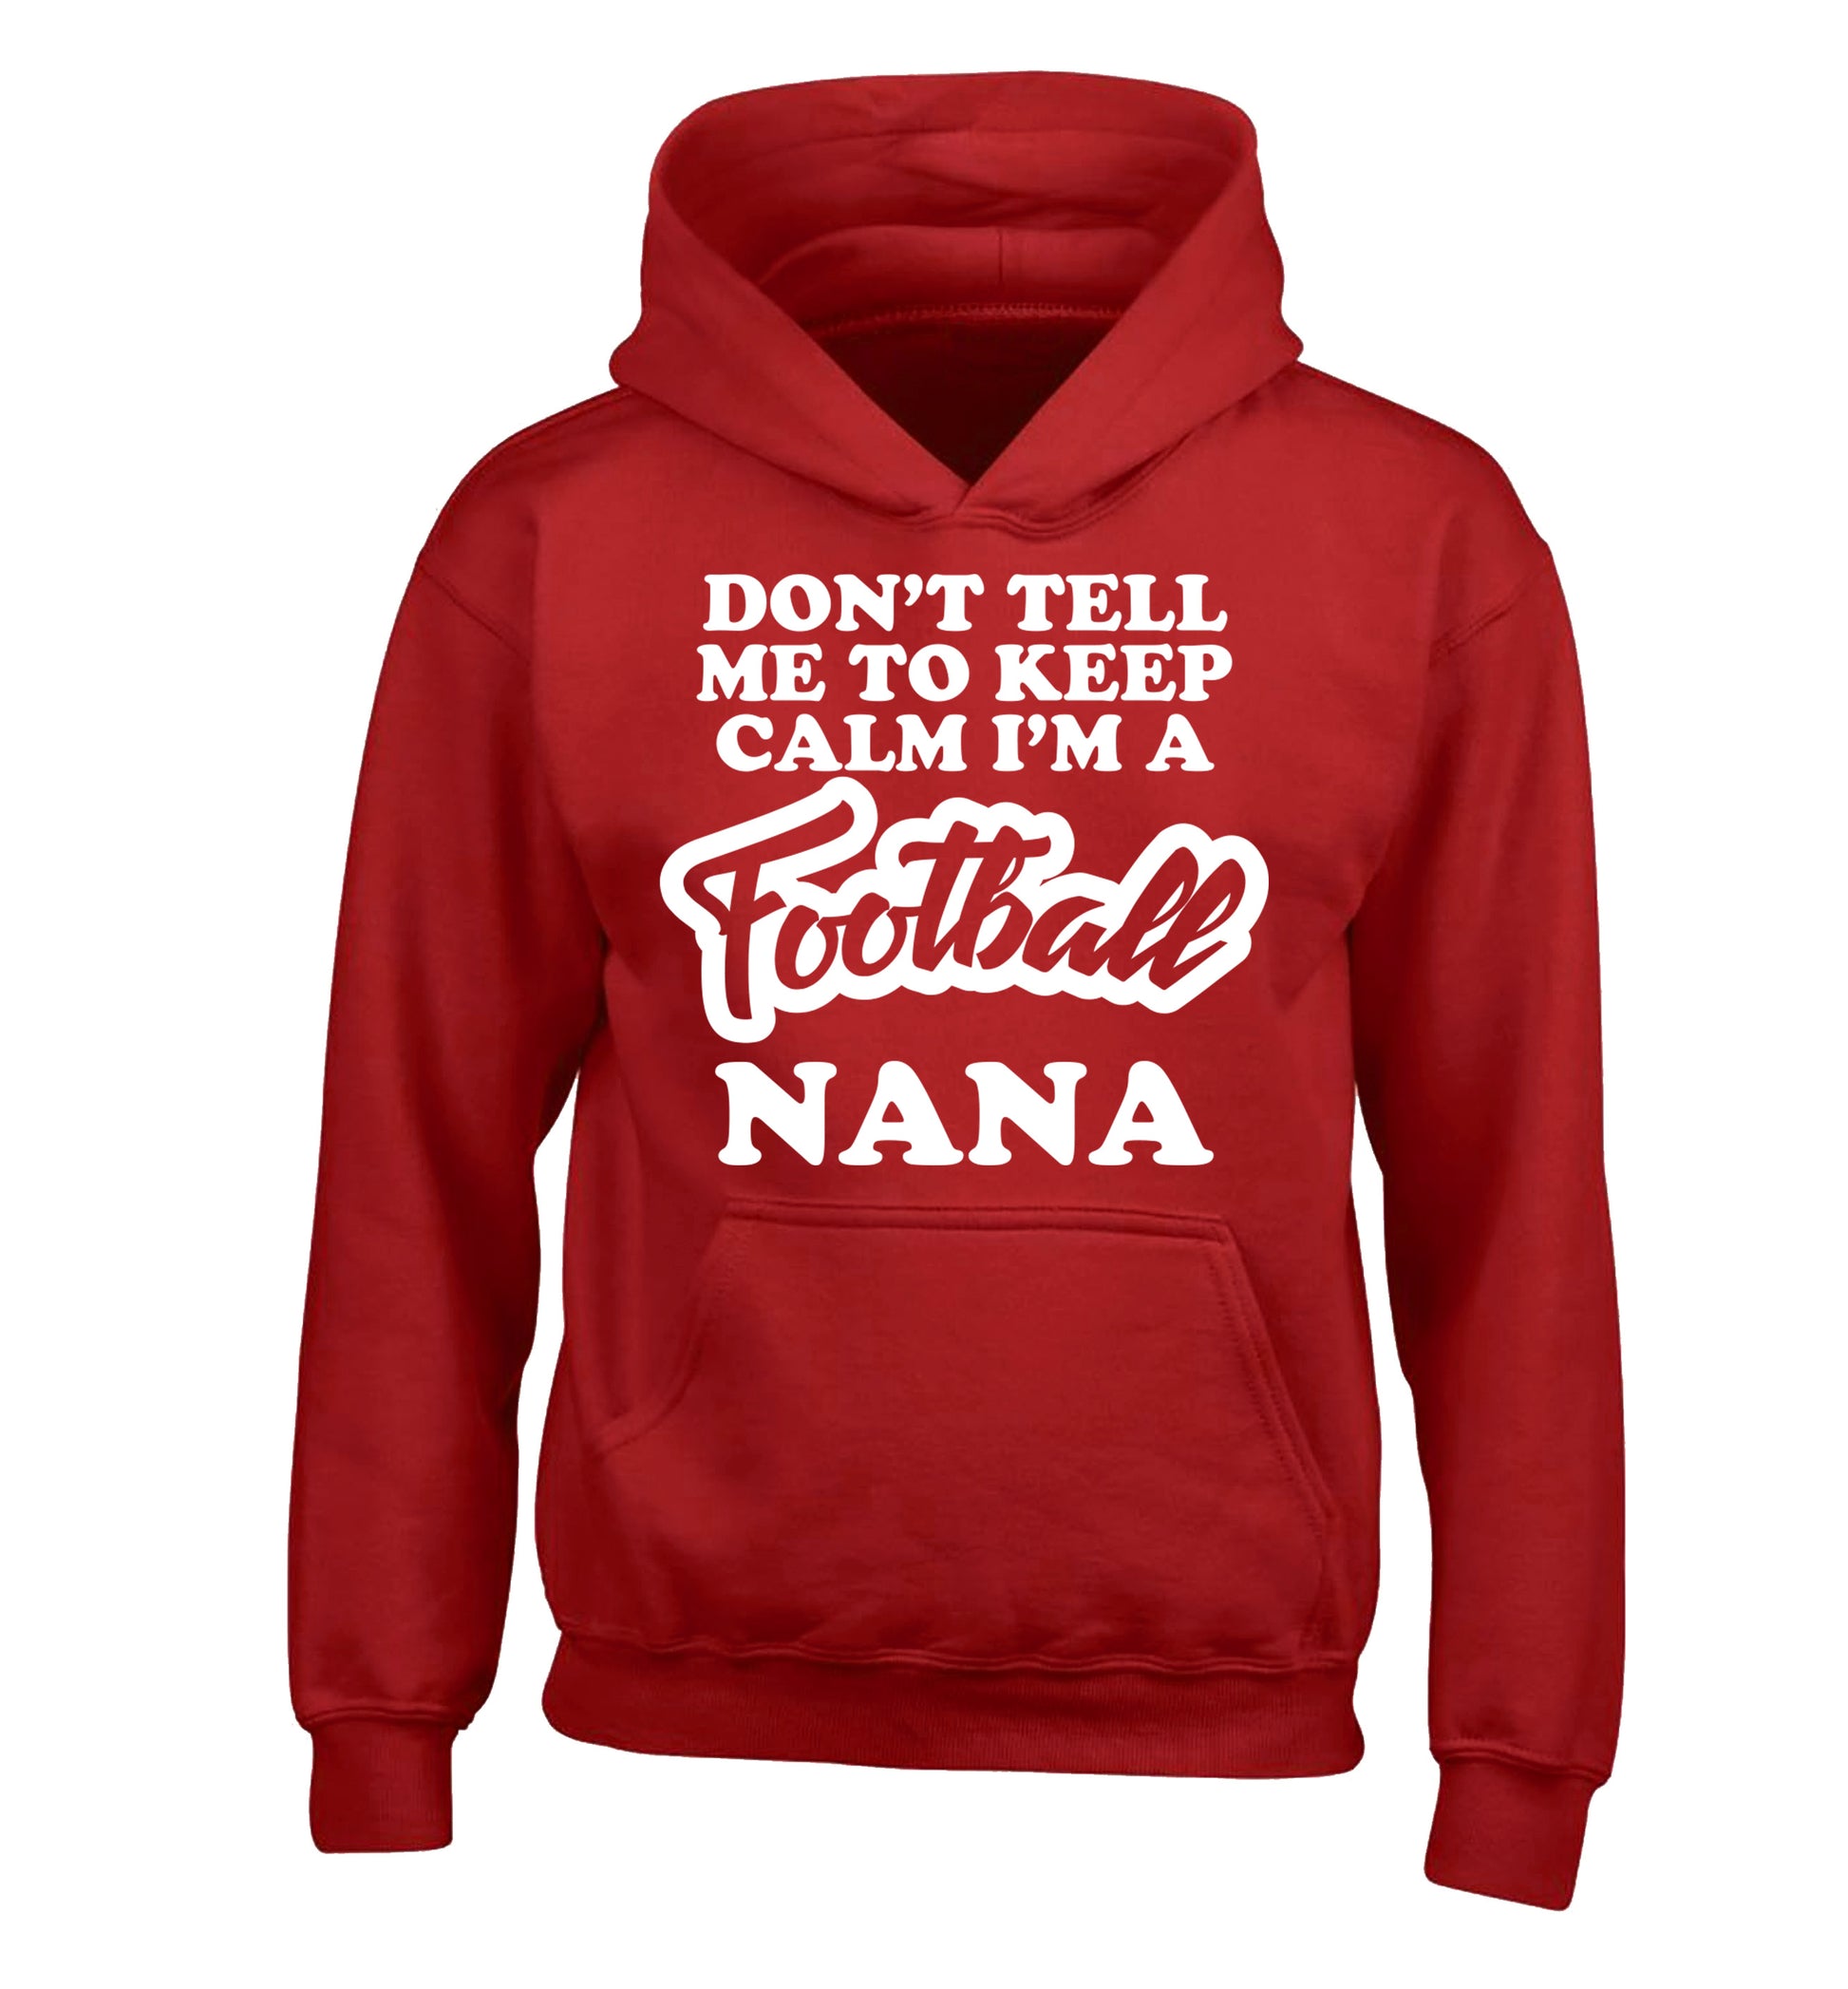 Don't tell me to keep calm I'm a football nana children's red hoodie 12-14 Years